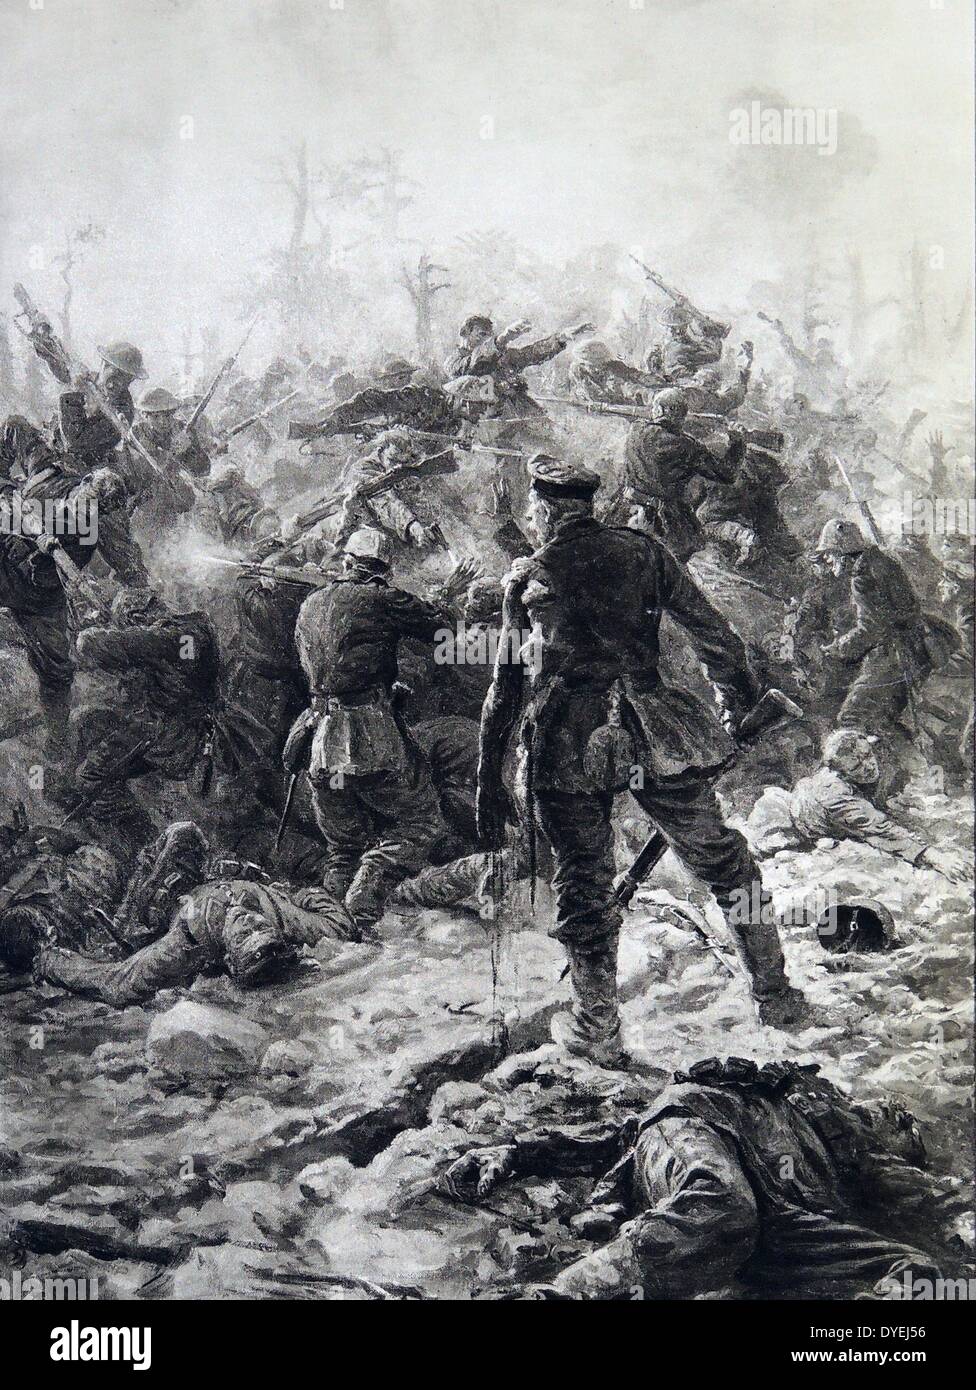 World War 1 - Battle of Devil's Wood - fierce hand to hand fighting between British and German soldiers. 1916. The Battle of Delville Wood 14 July – 3 September, was an engagement in the 1916 Battle of the Somme in the First World War. Stock Photo